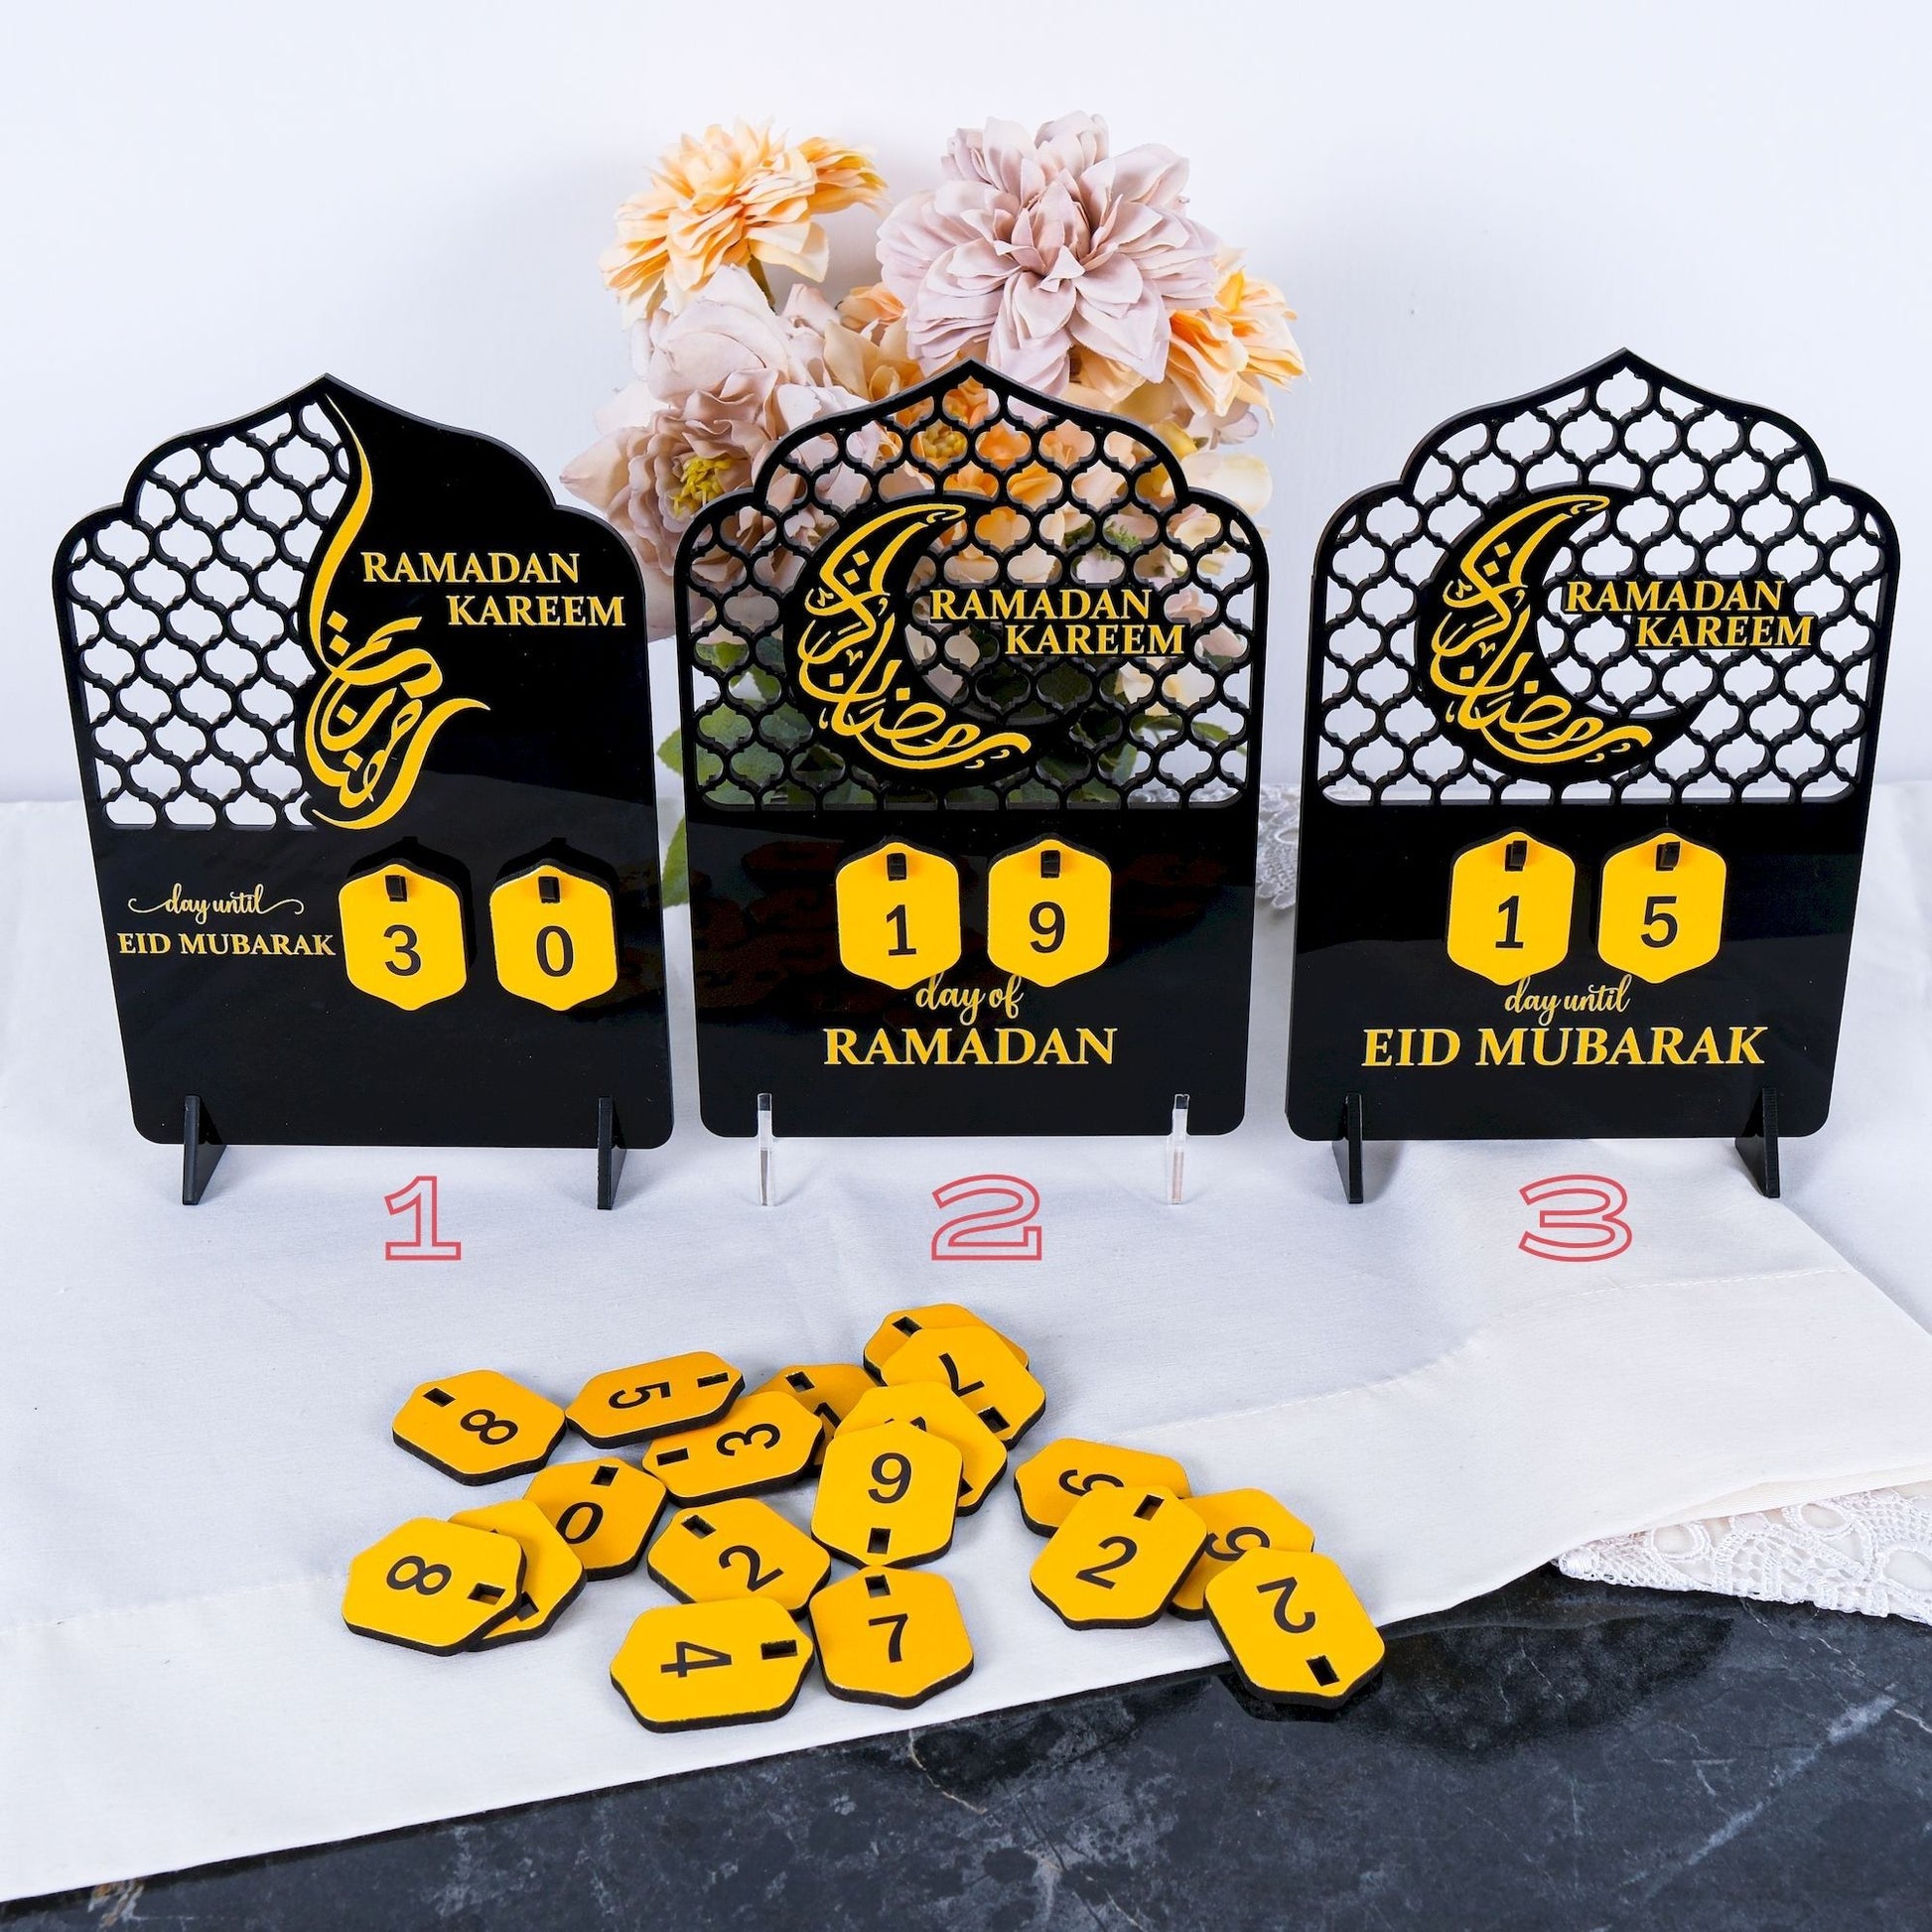 Ramadan Advent Countdown Calendar Islamic Home Table Decor Muslim Art - Islamic Elite Favors is a handmade gift shop offering a wide variety of unique and personalized gifts for all occasions. Whether you're looking for the perfect Ramadan, Eid, Hajj, wedding gift or something special for a birthday, baby shower or anniversary, we have something for everyone. High quality, made with love.